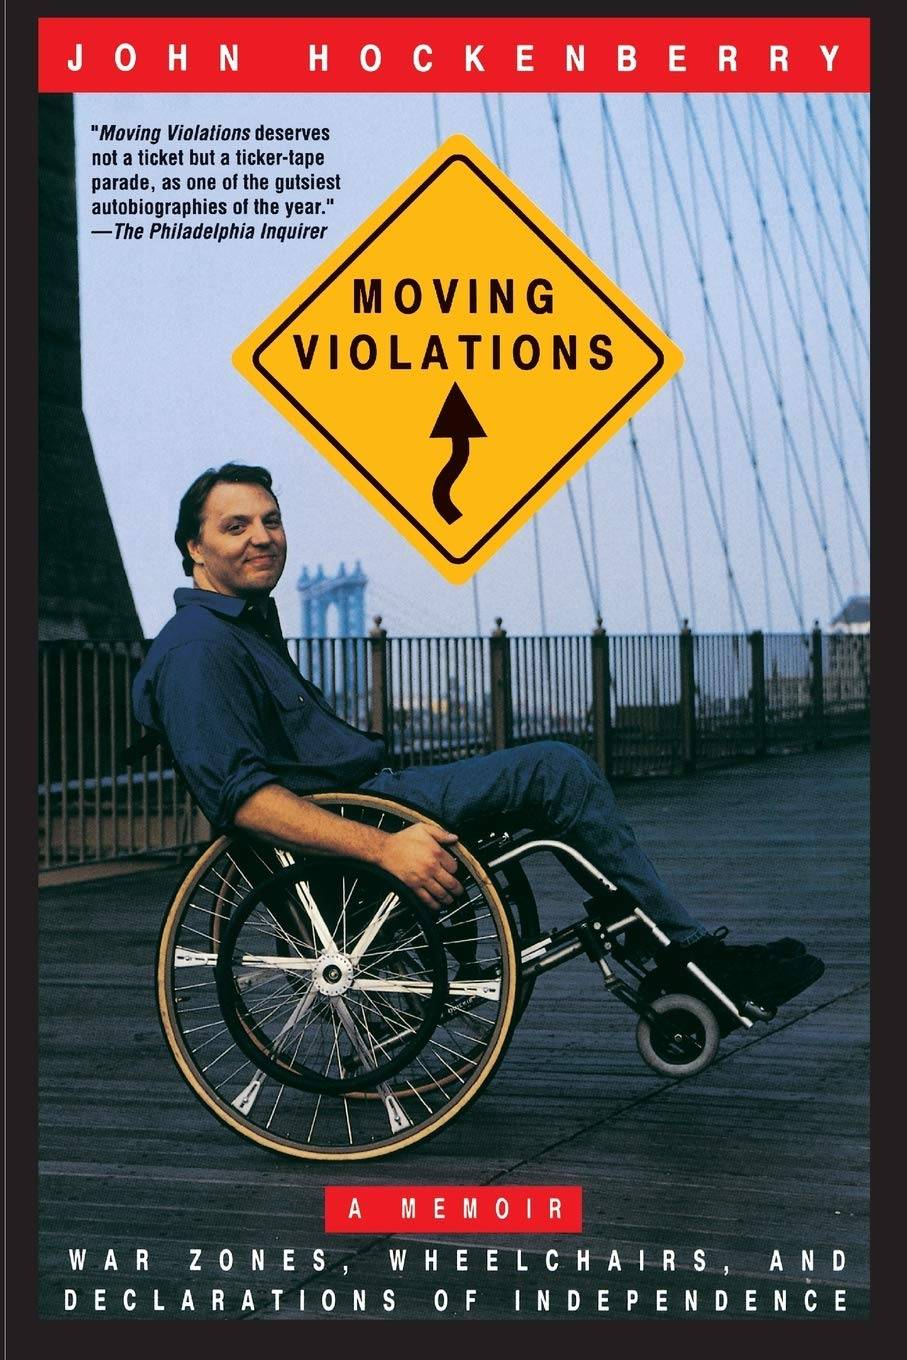 "Moving Violations" book cover featuring a photo of person in a wheelchair on a bridge.